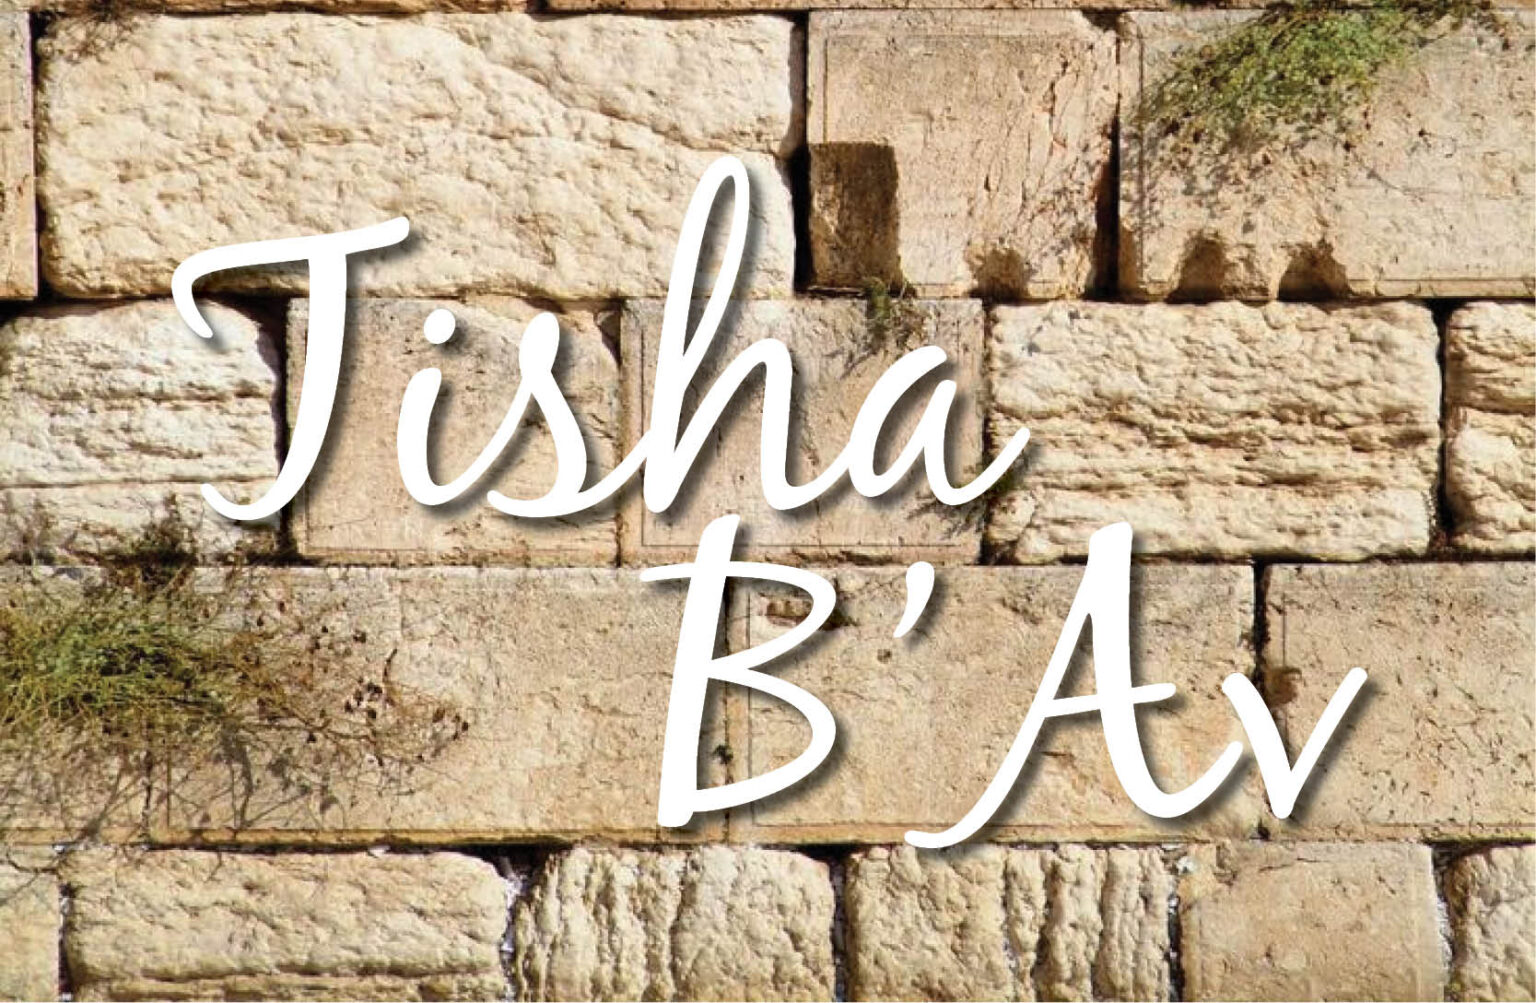 Tisha B’Av Services Sunday morning and afternoon Congregation Or